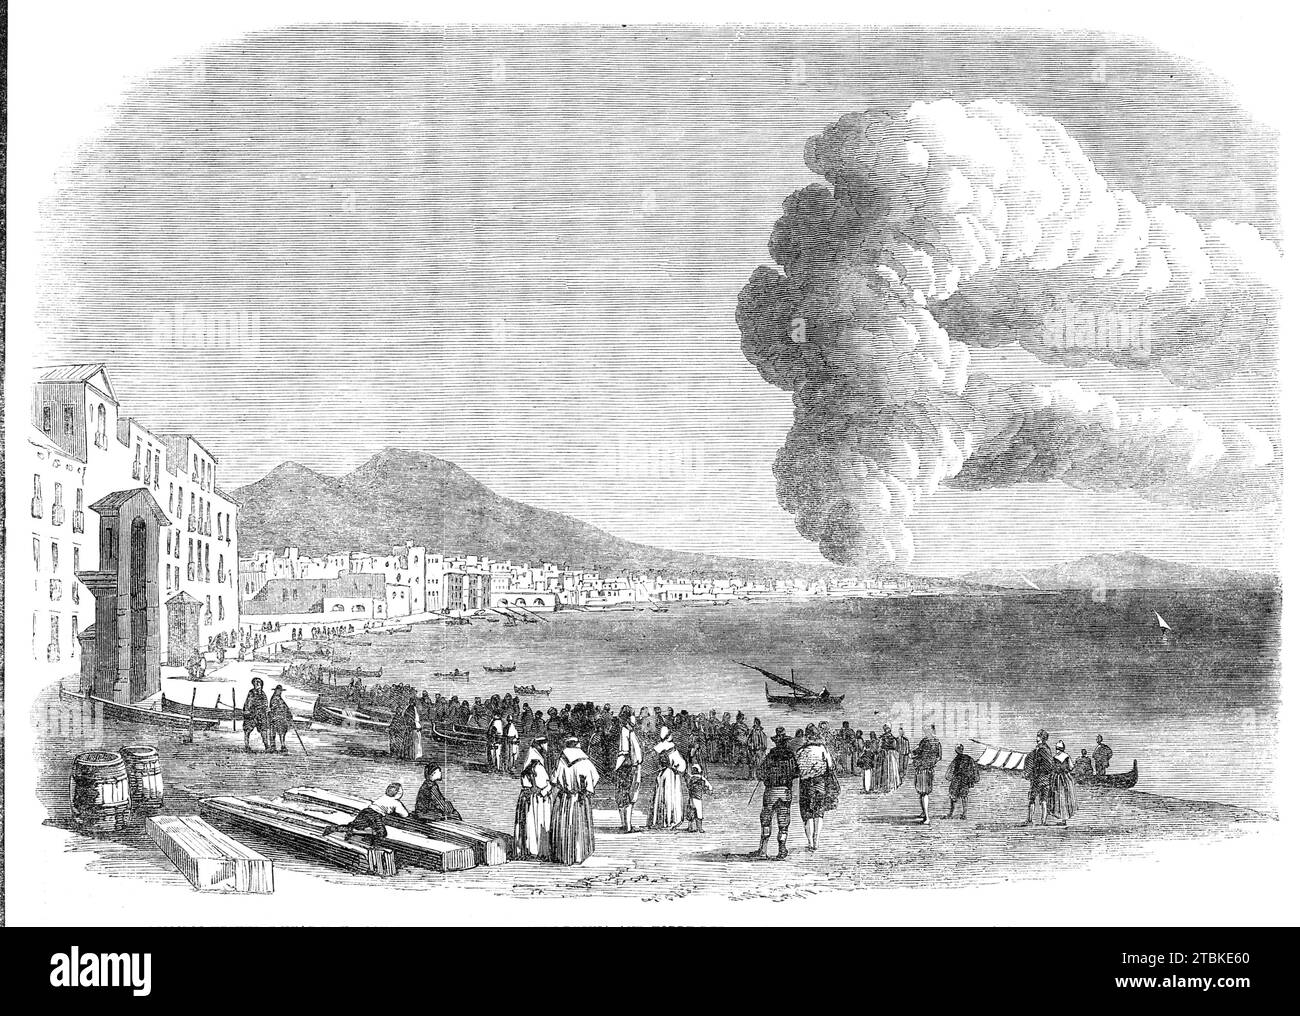 Eruption of Mount Vesuvius near the foot of the hill, between Resina and Torre de Greco, as seen from the Marinella at Naples, 1861. Engraving from a sketch by Mr. Roskilly. 'In two or three minutes the smoke had reached the height shown in the Illustration...[a] new crater...burst out on the old lava...The aspect of the village of Torre del Greco is something fearful...Not one house was left uninjured, and a great number were destroyed...the horizon was perfectly obscured, the mouth of the bay hidden by smoke and ashes...[Vesuvius] burst out in double fury, throwing up stones and its ashes... Stock Photo